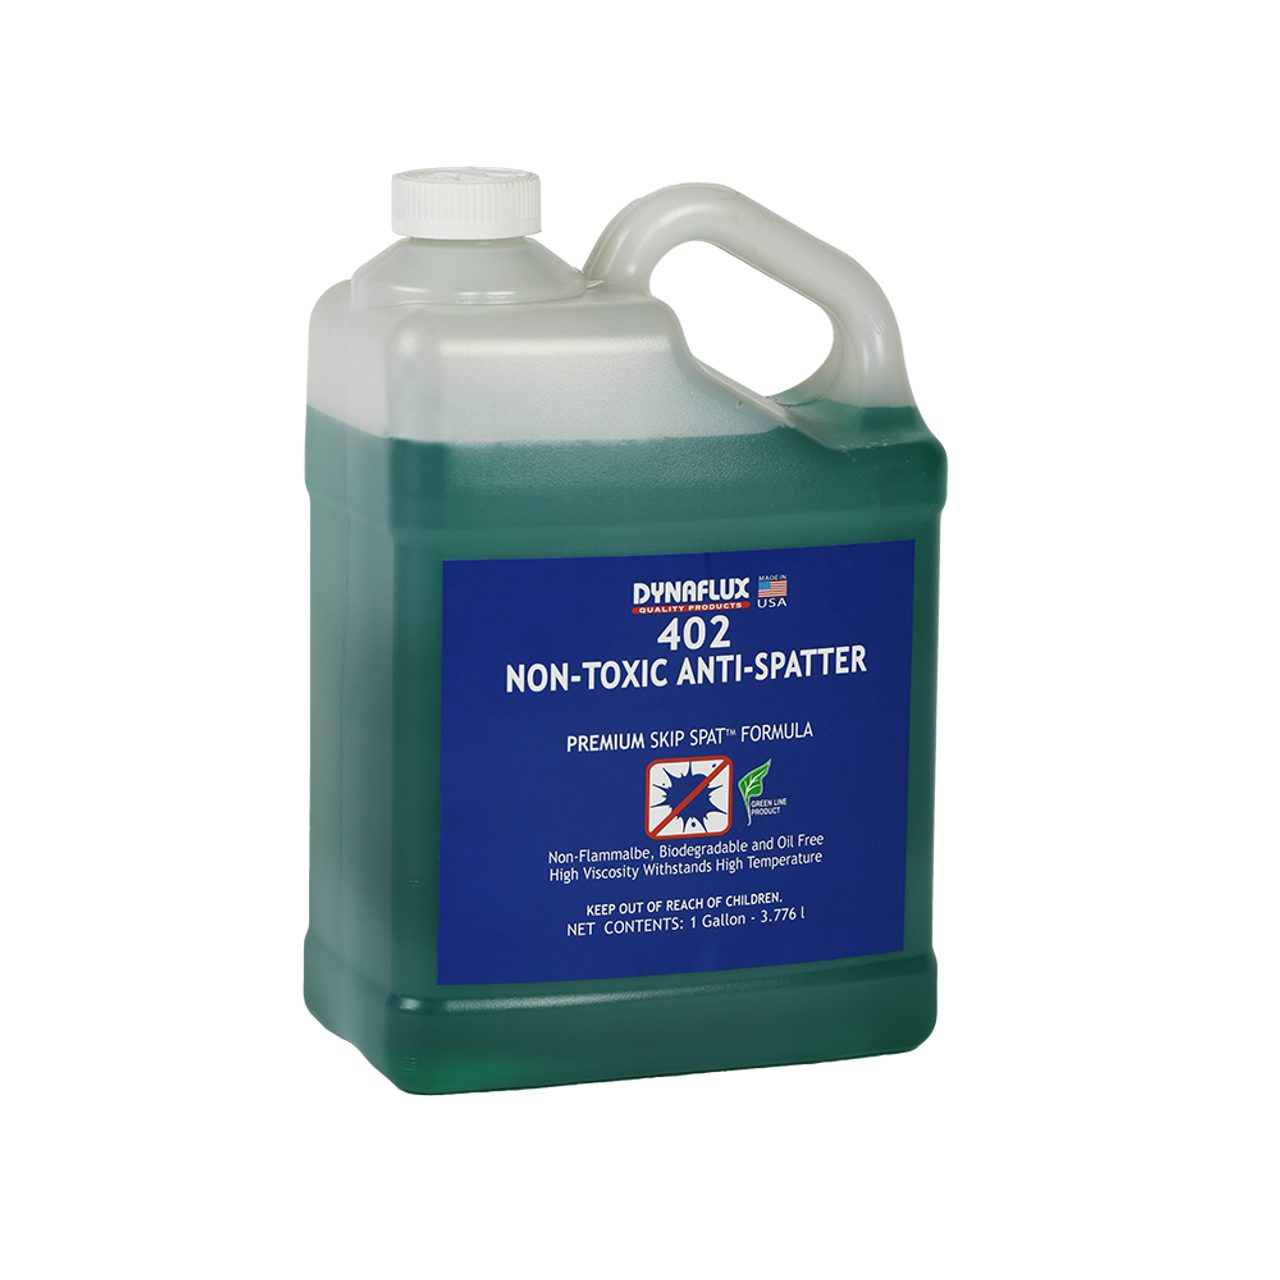 Available in 4x1 Gallon Case
402-4x1